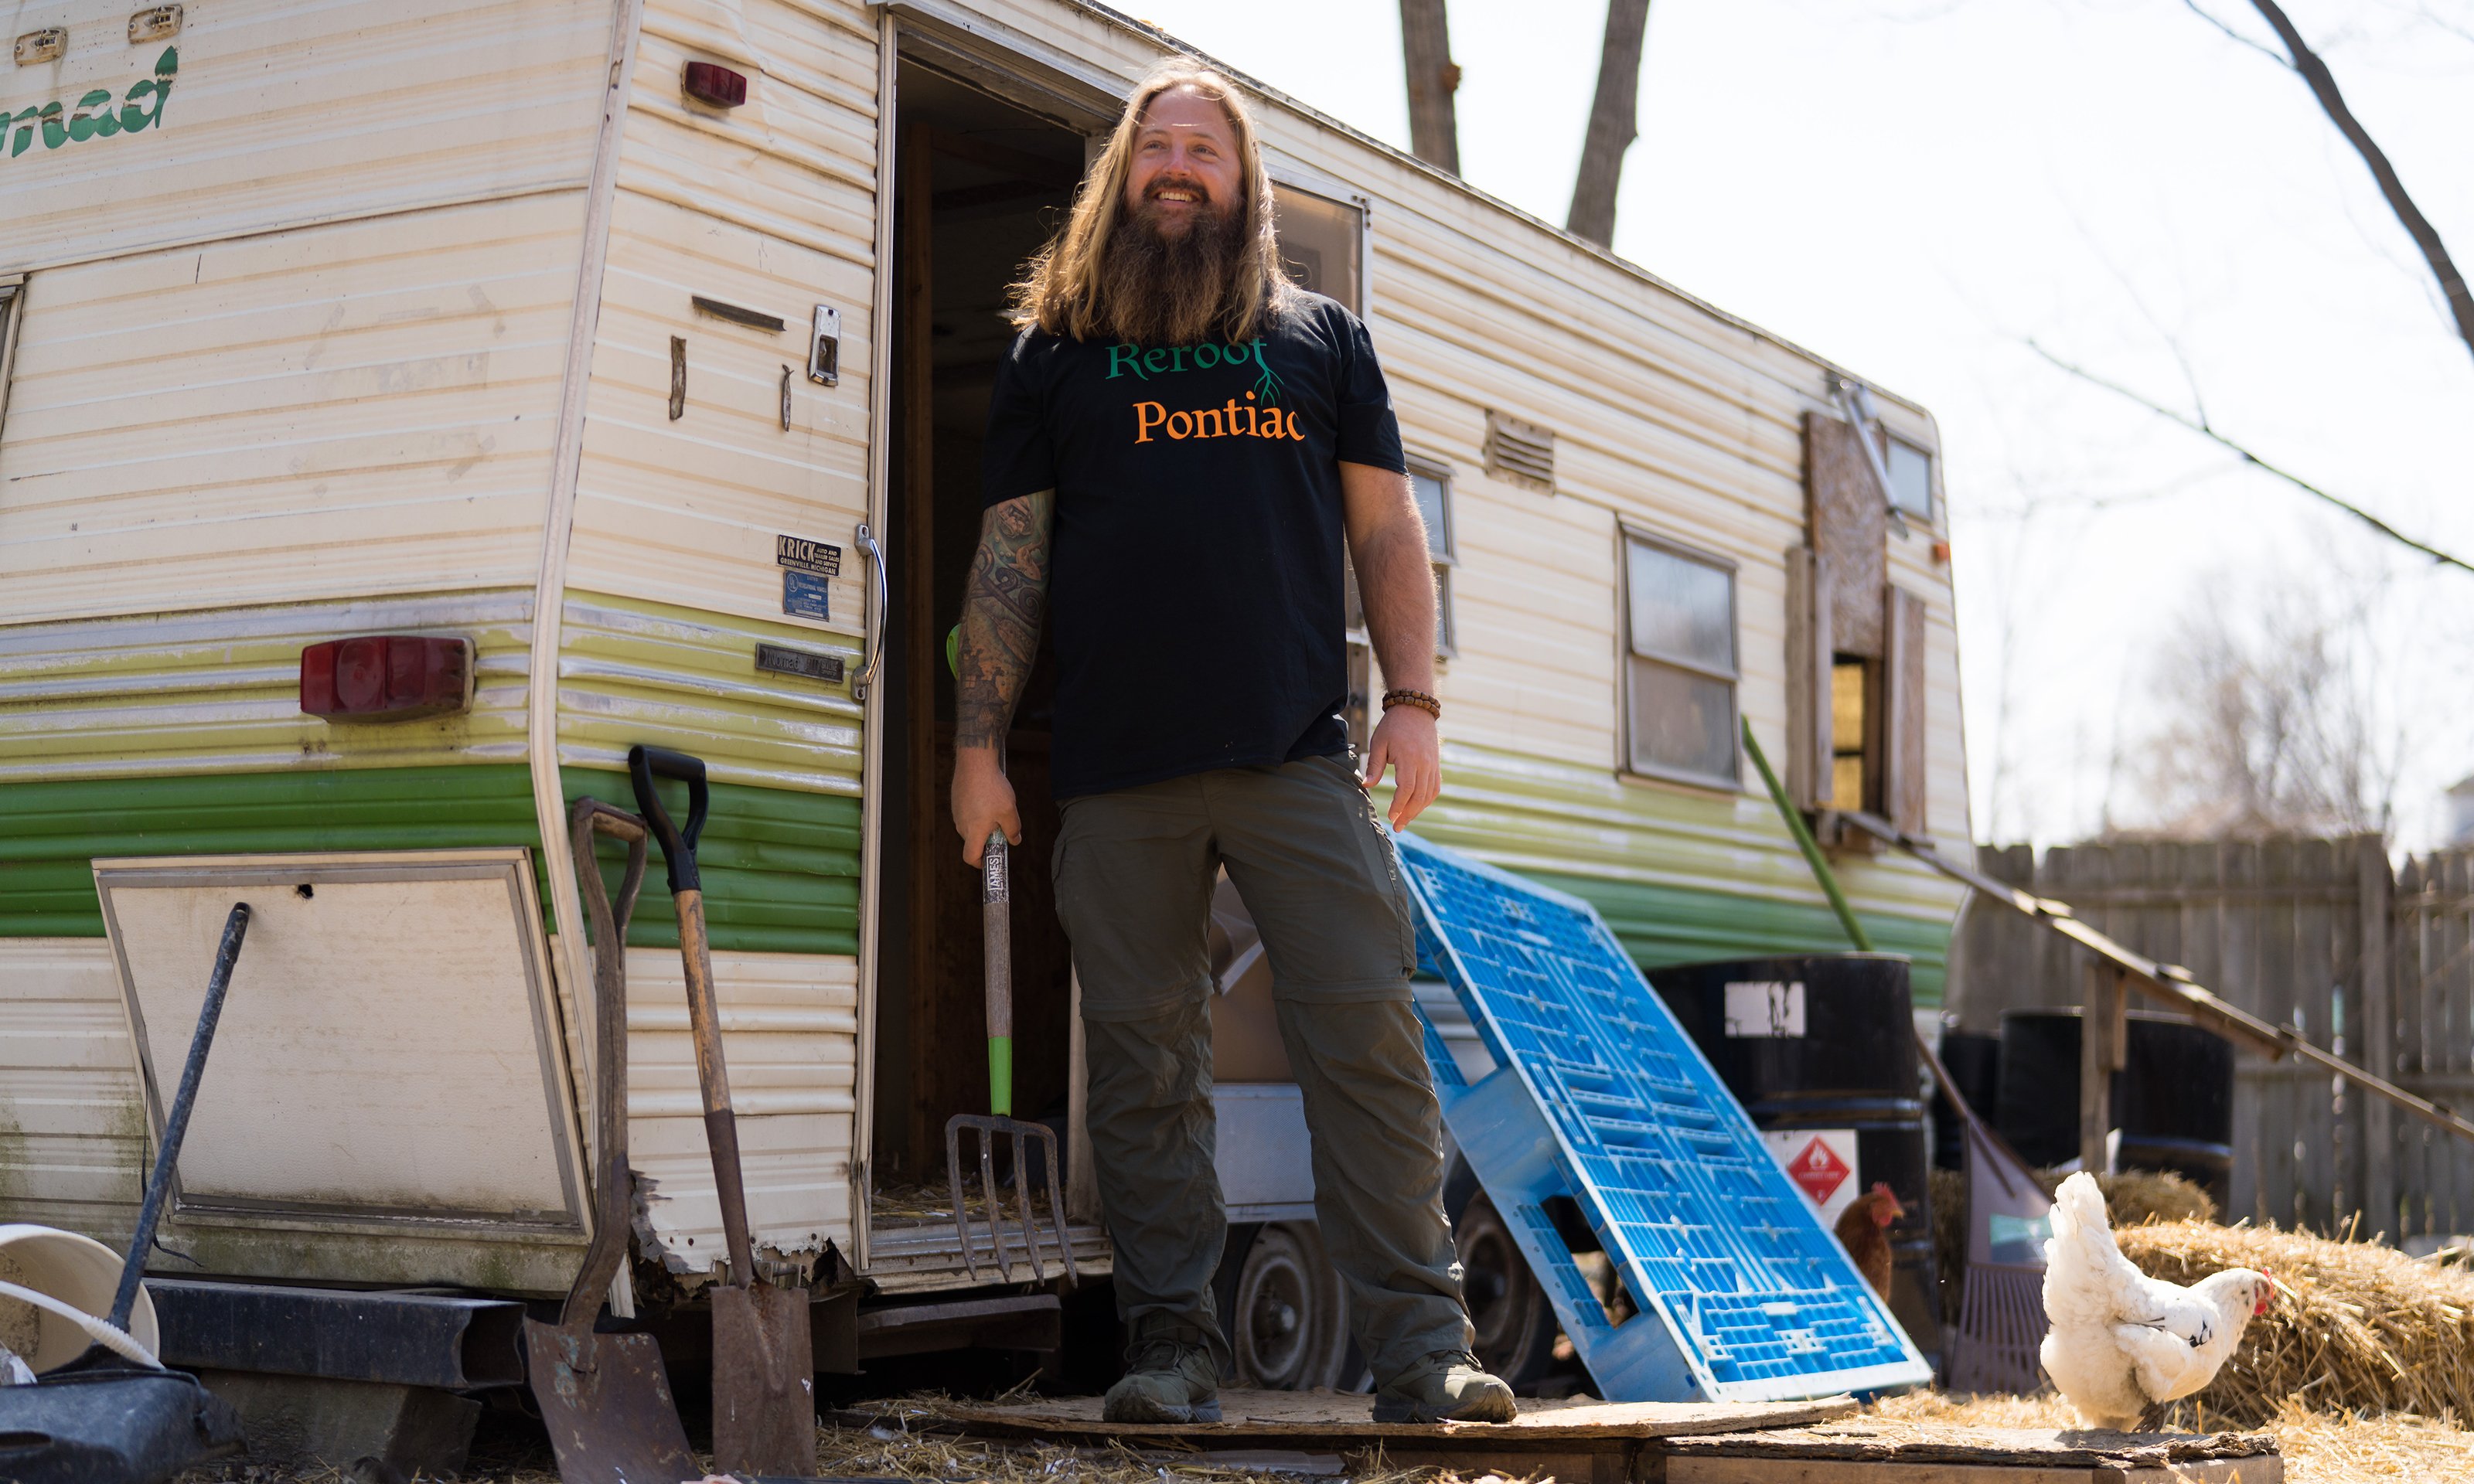 A man holding a pitchfork standing outside of a mobile home.